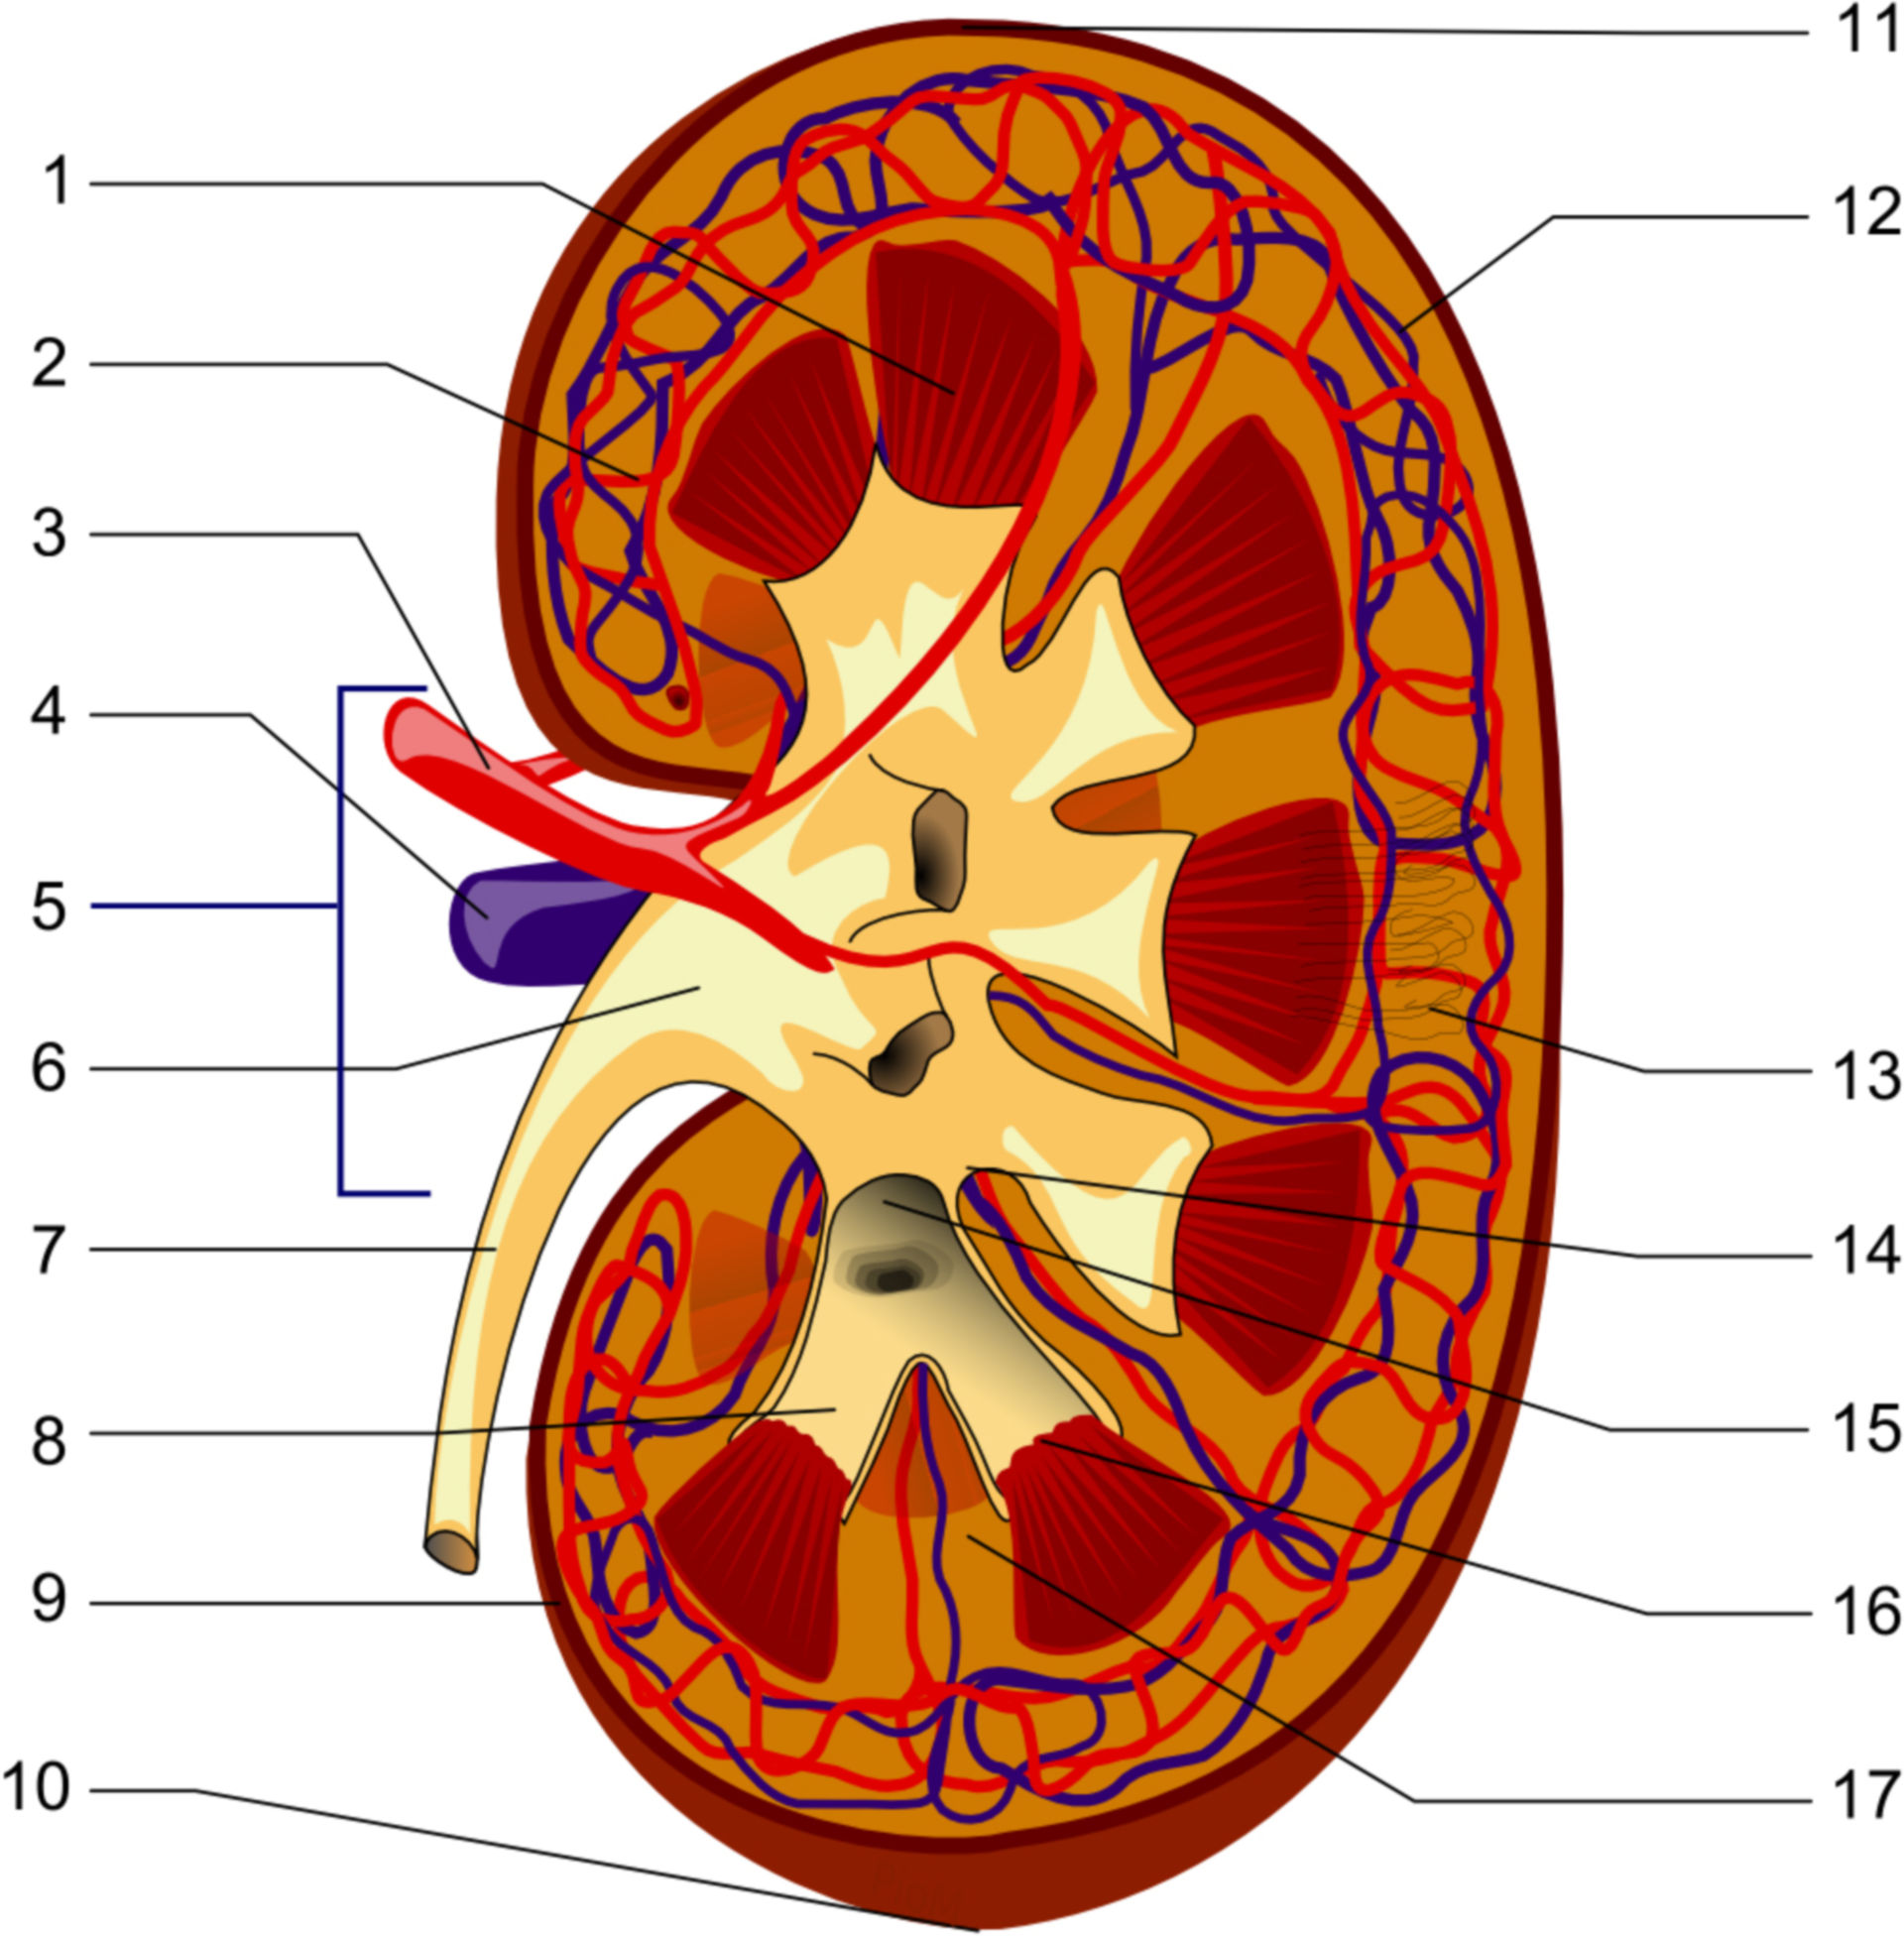 Structures of the kidney